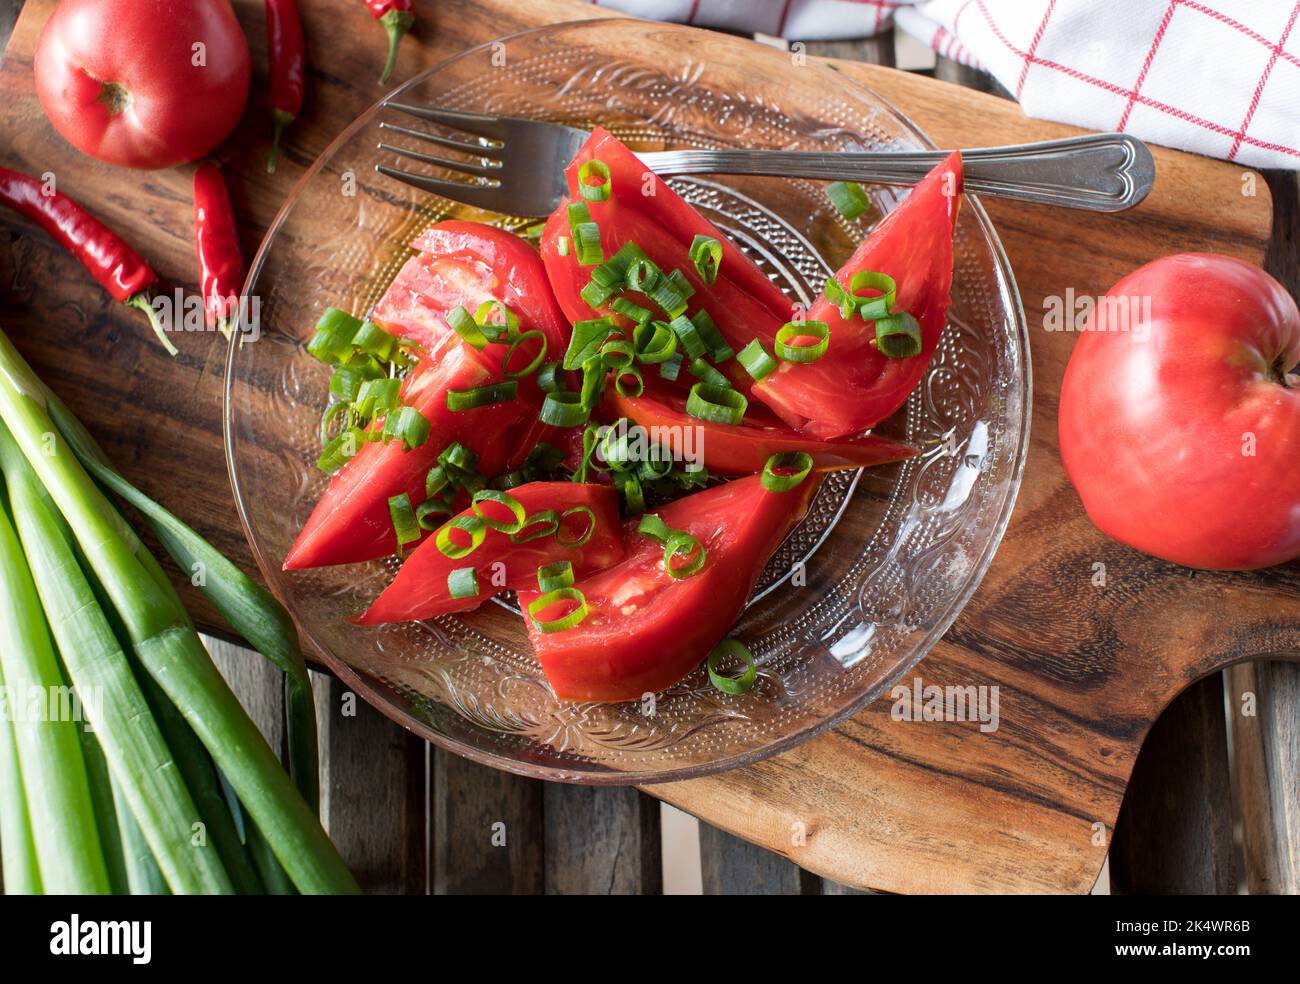 Tomato salad with beefsteak tomatoes, chives and olive oil Stock Photo